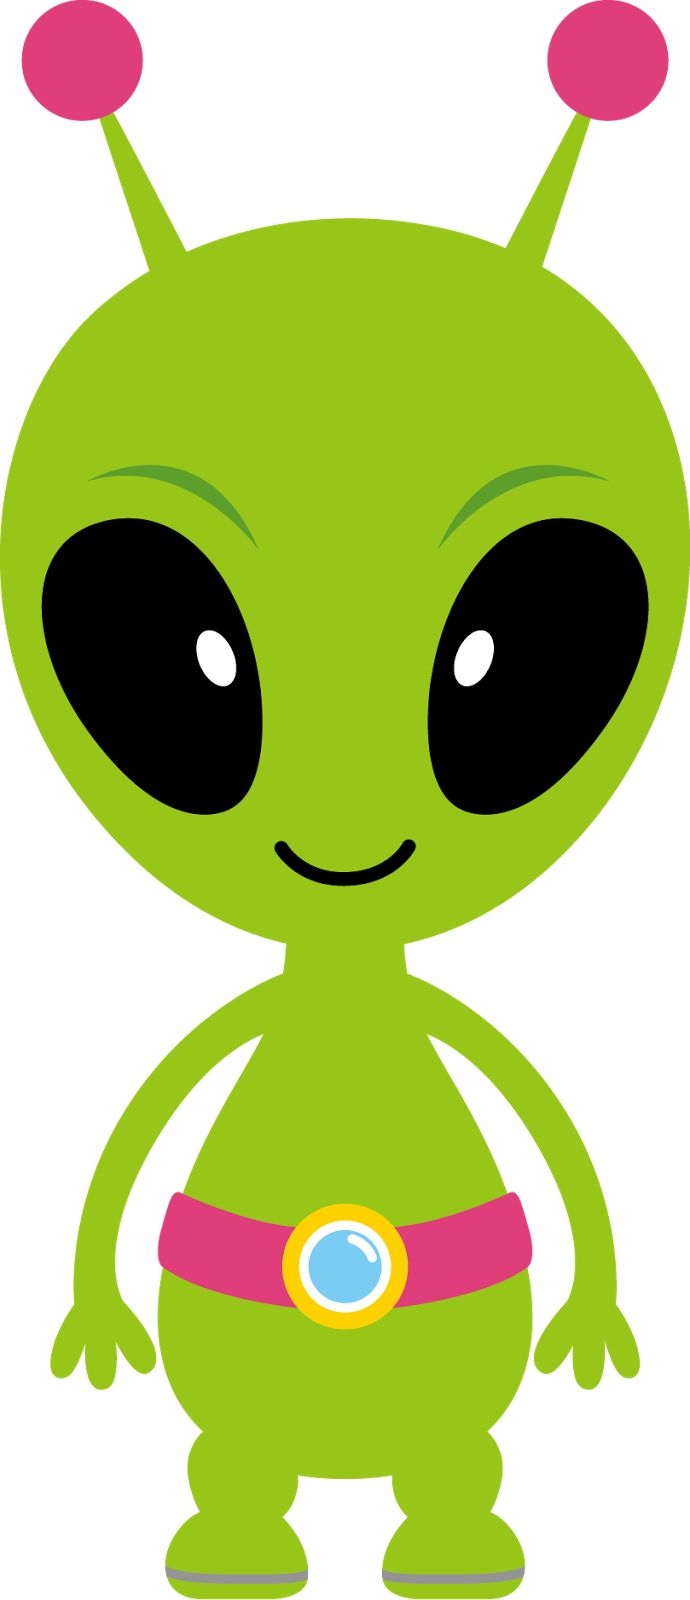 Alien clipart real, Alien real Transparent FREE for download